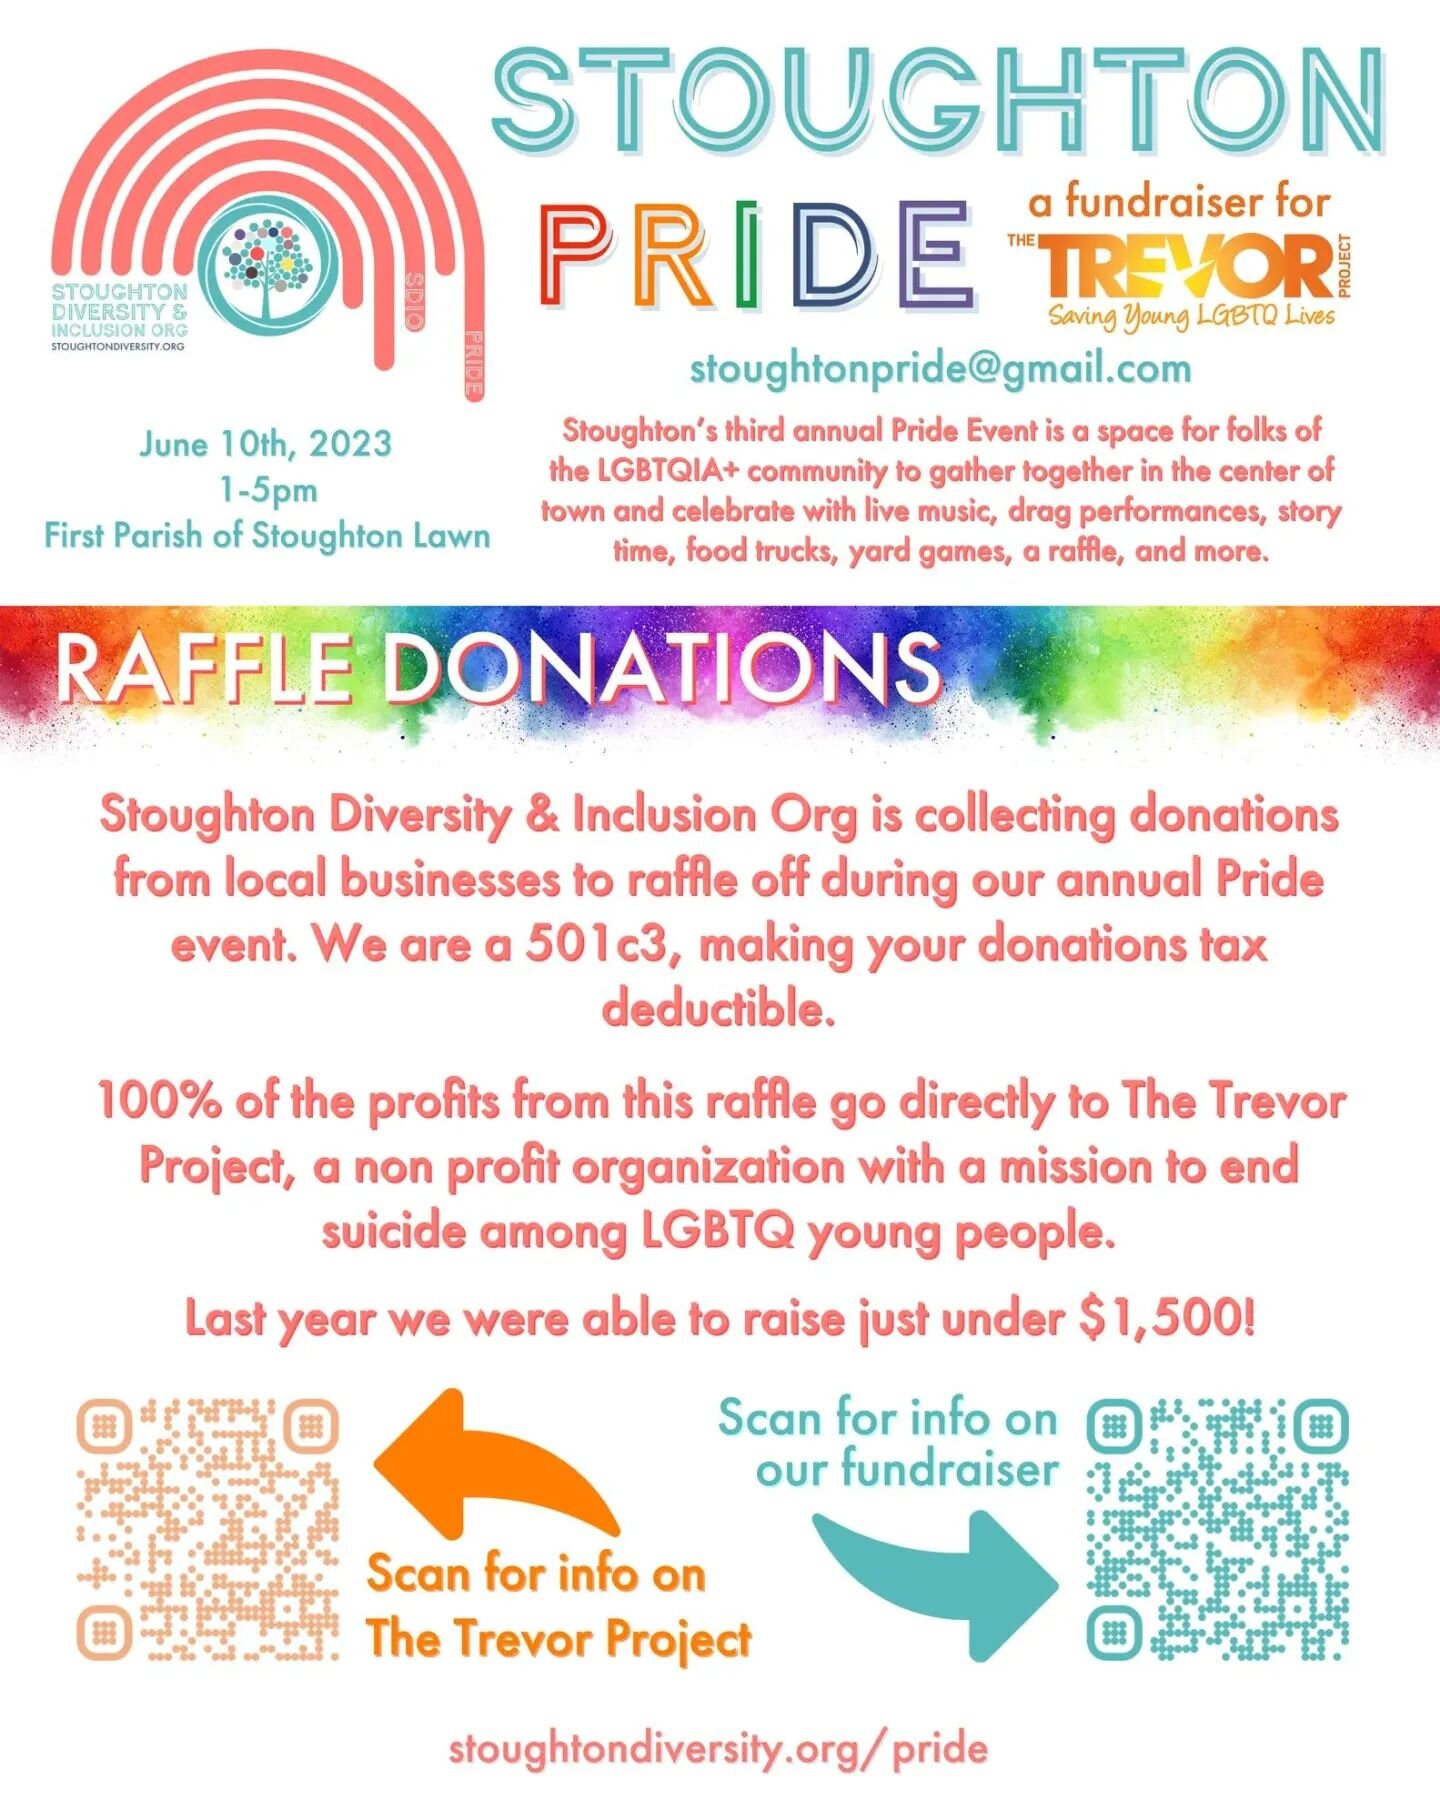 Stoughton Pride is looking for donations for our raffle fundraiser to raise money for The Trevor Project! 

Stoughton Diversity &amp; Inclusion Org is collecting donations from local businesses to raffle off during our annual Pride event. We are a 50